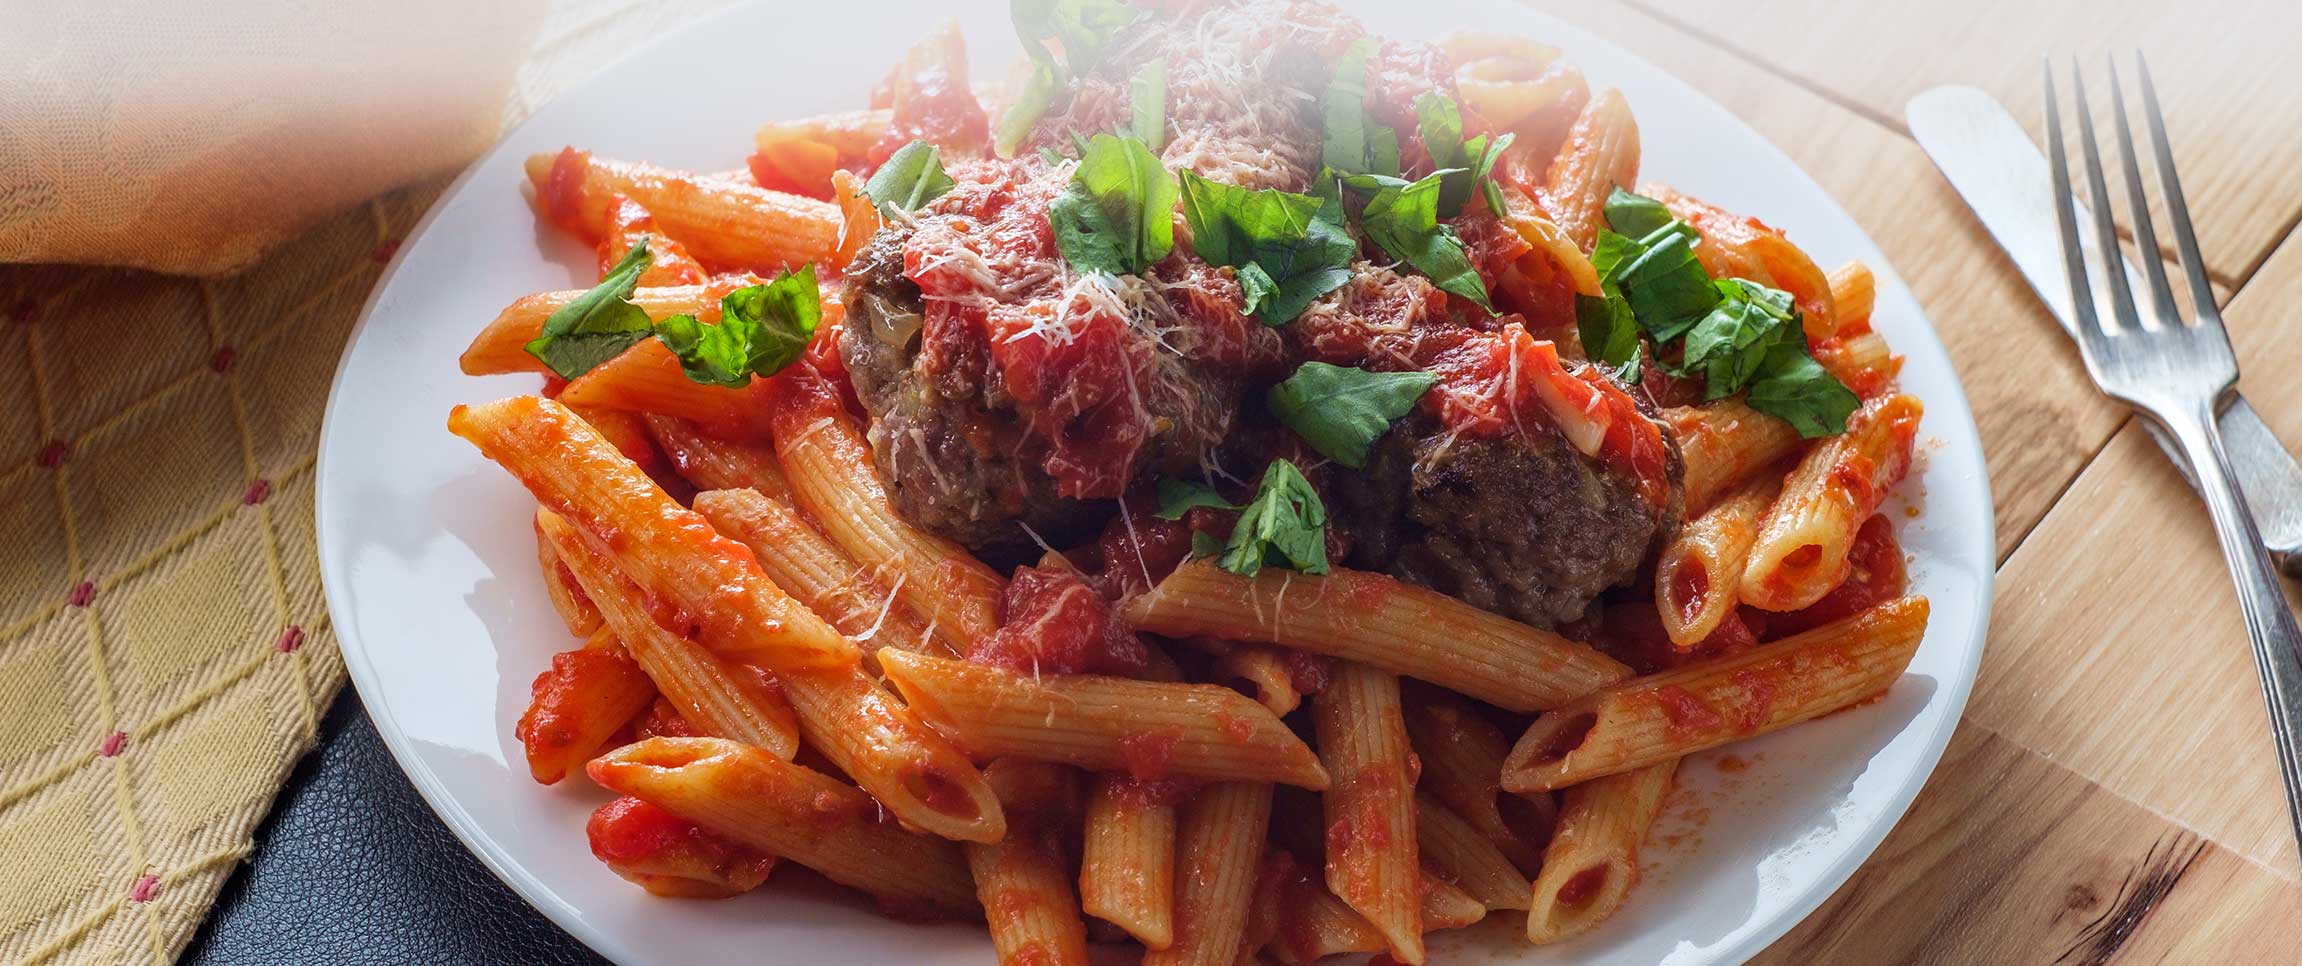 Roma® Gluten Free Penne Pasta and Beef Meatballs